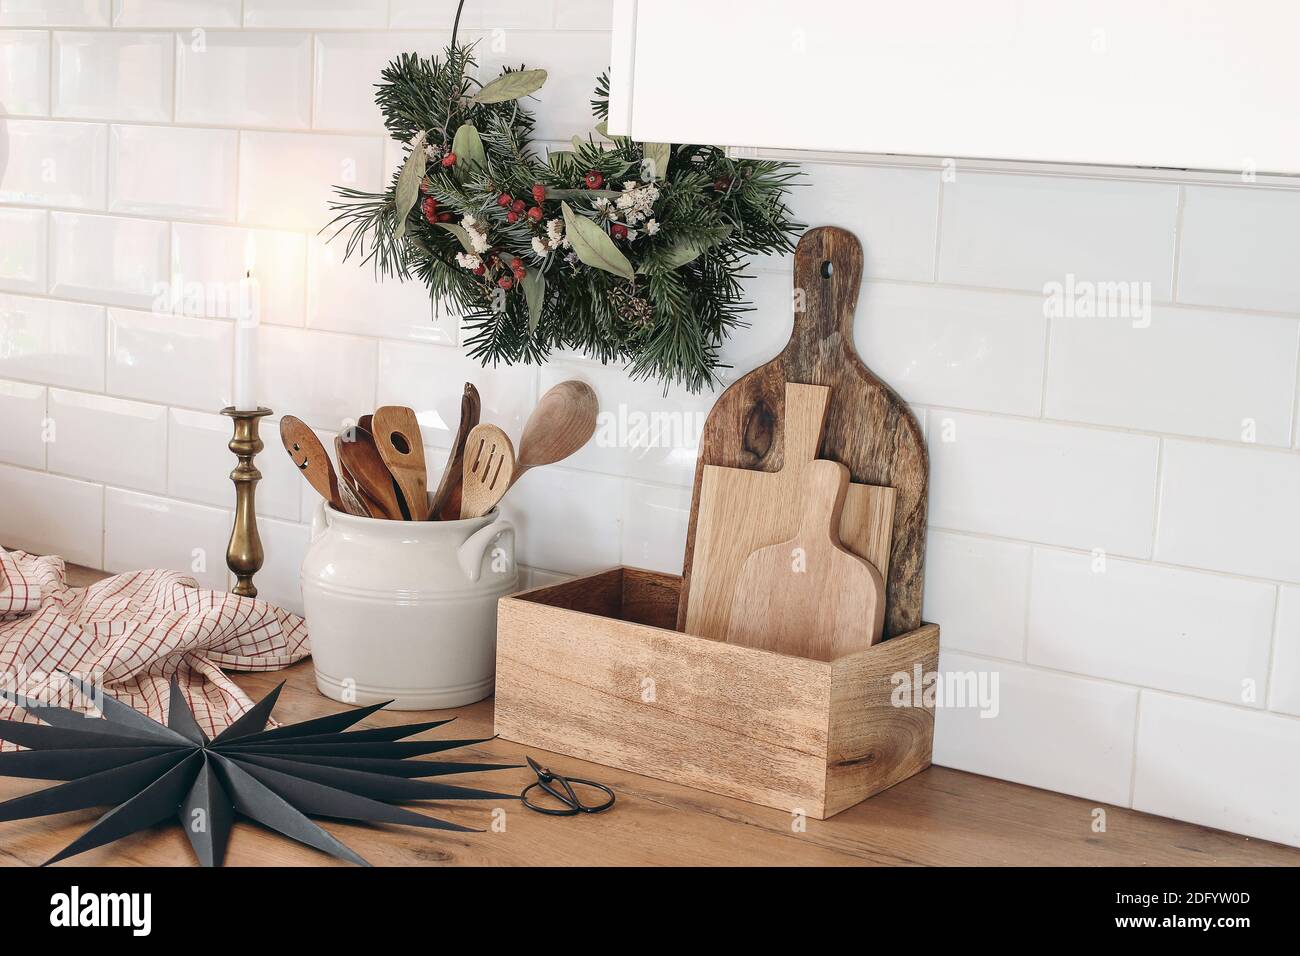 Closeup of kitchen interior. Christmas decoration. Advent floral hoop wreath. Black paper star. White brick wall, metro tiles, wooden countertops with Stock Photo